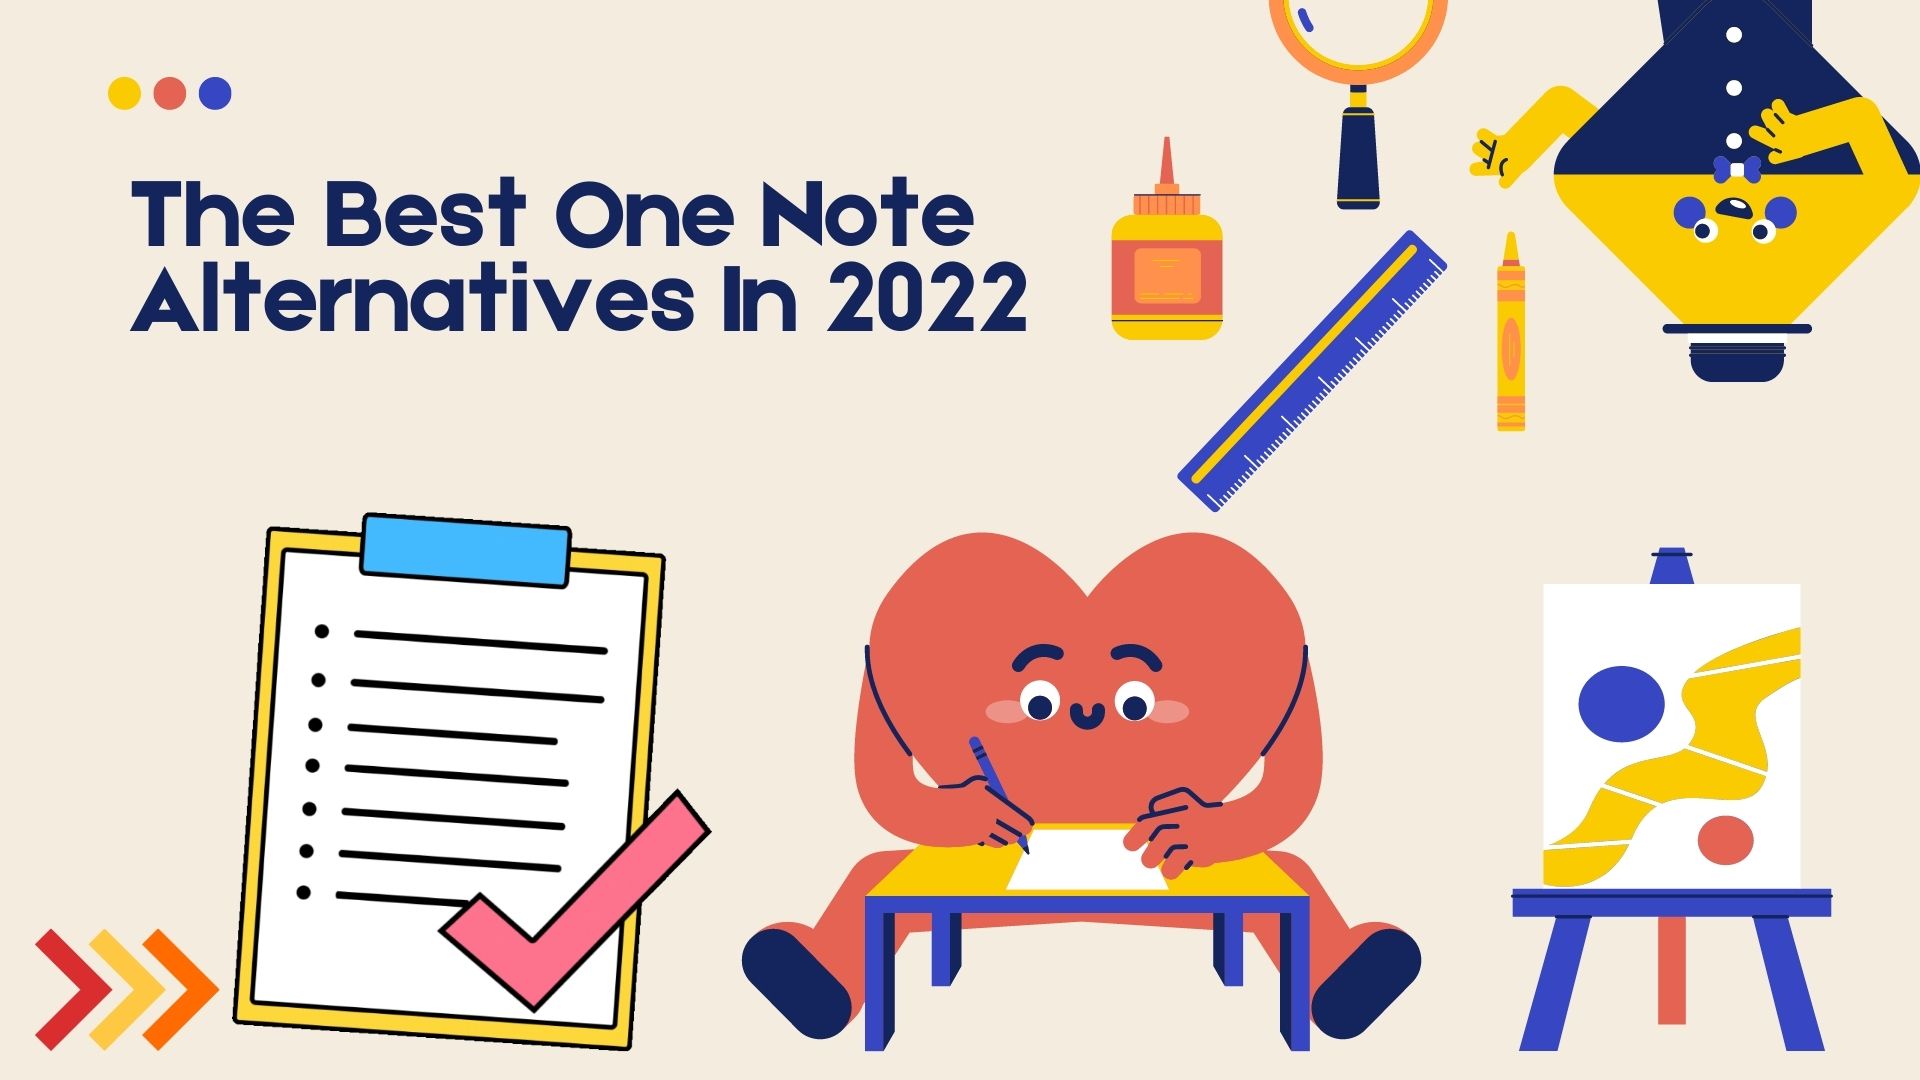 The Best One Note Alternatives